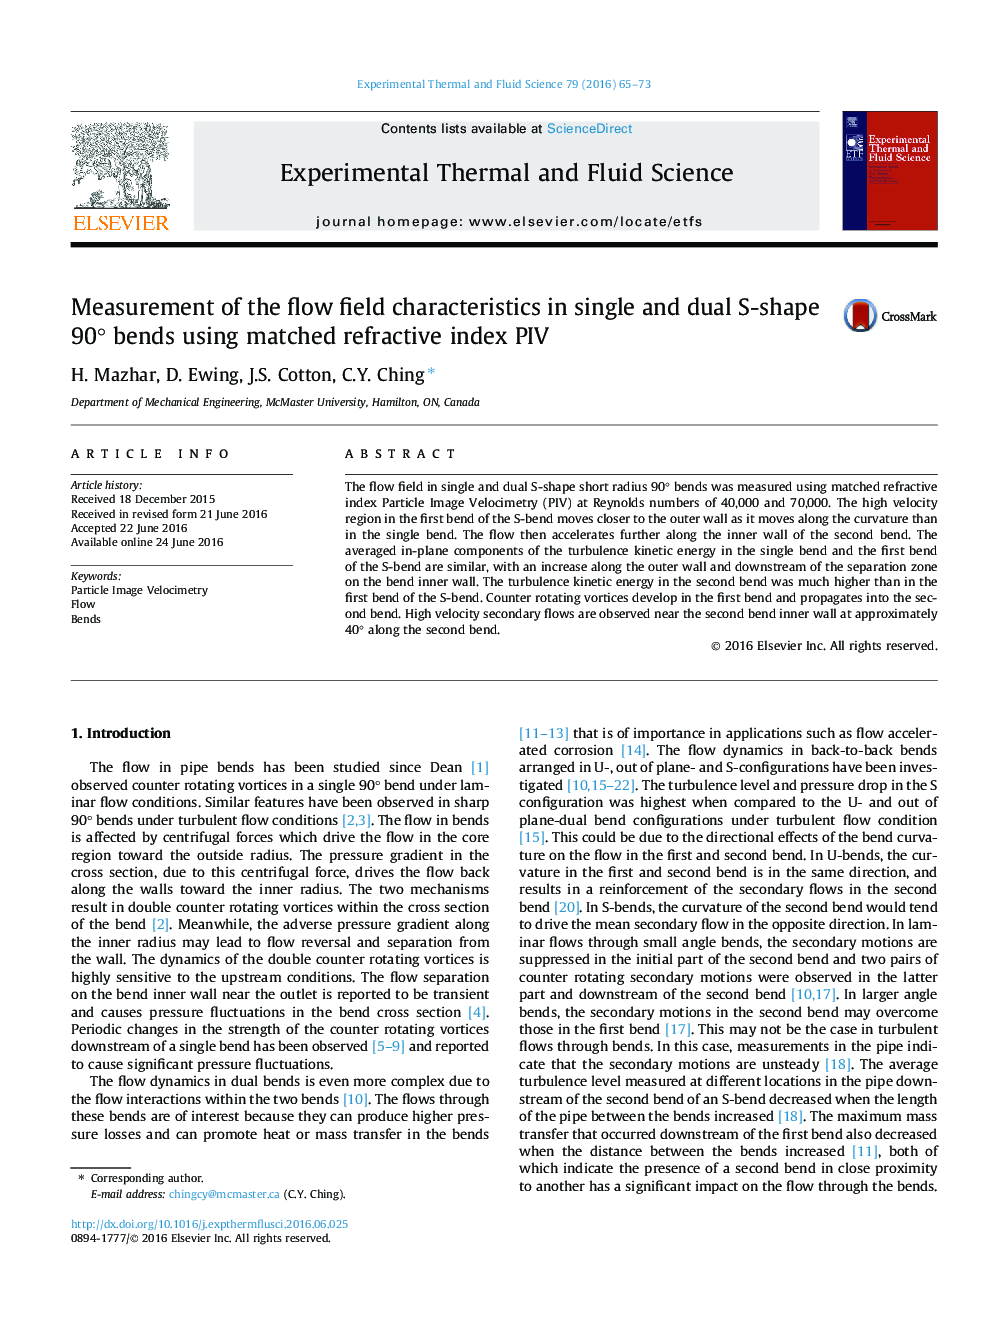 Measurement of the flow field characteristics in single and dual S-shape 90° bends using matched refractive index PIV